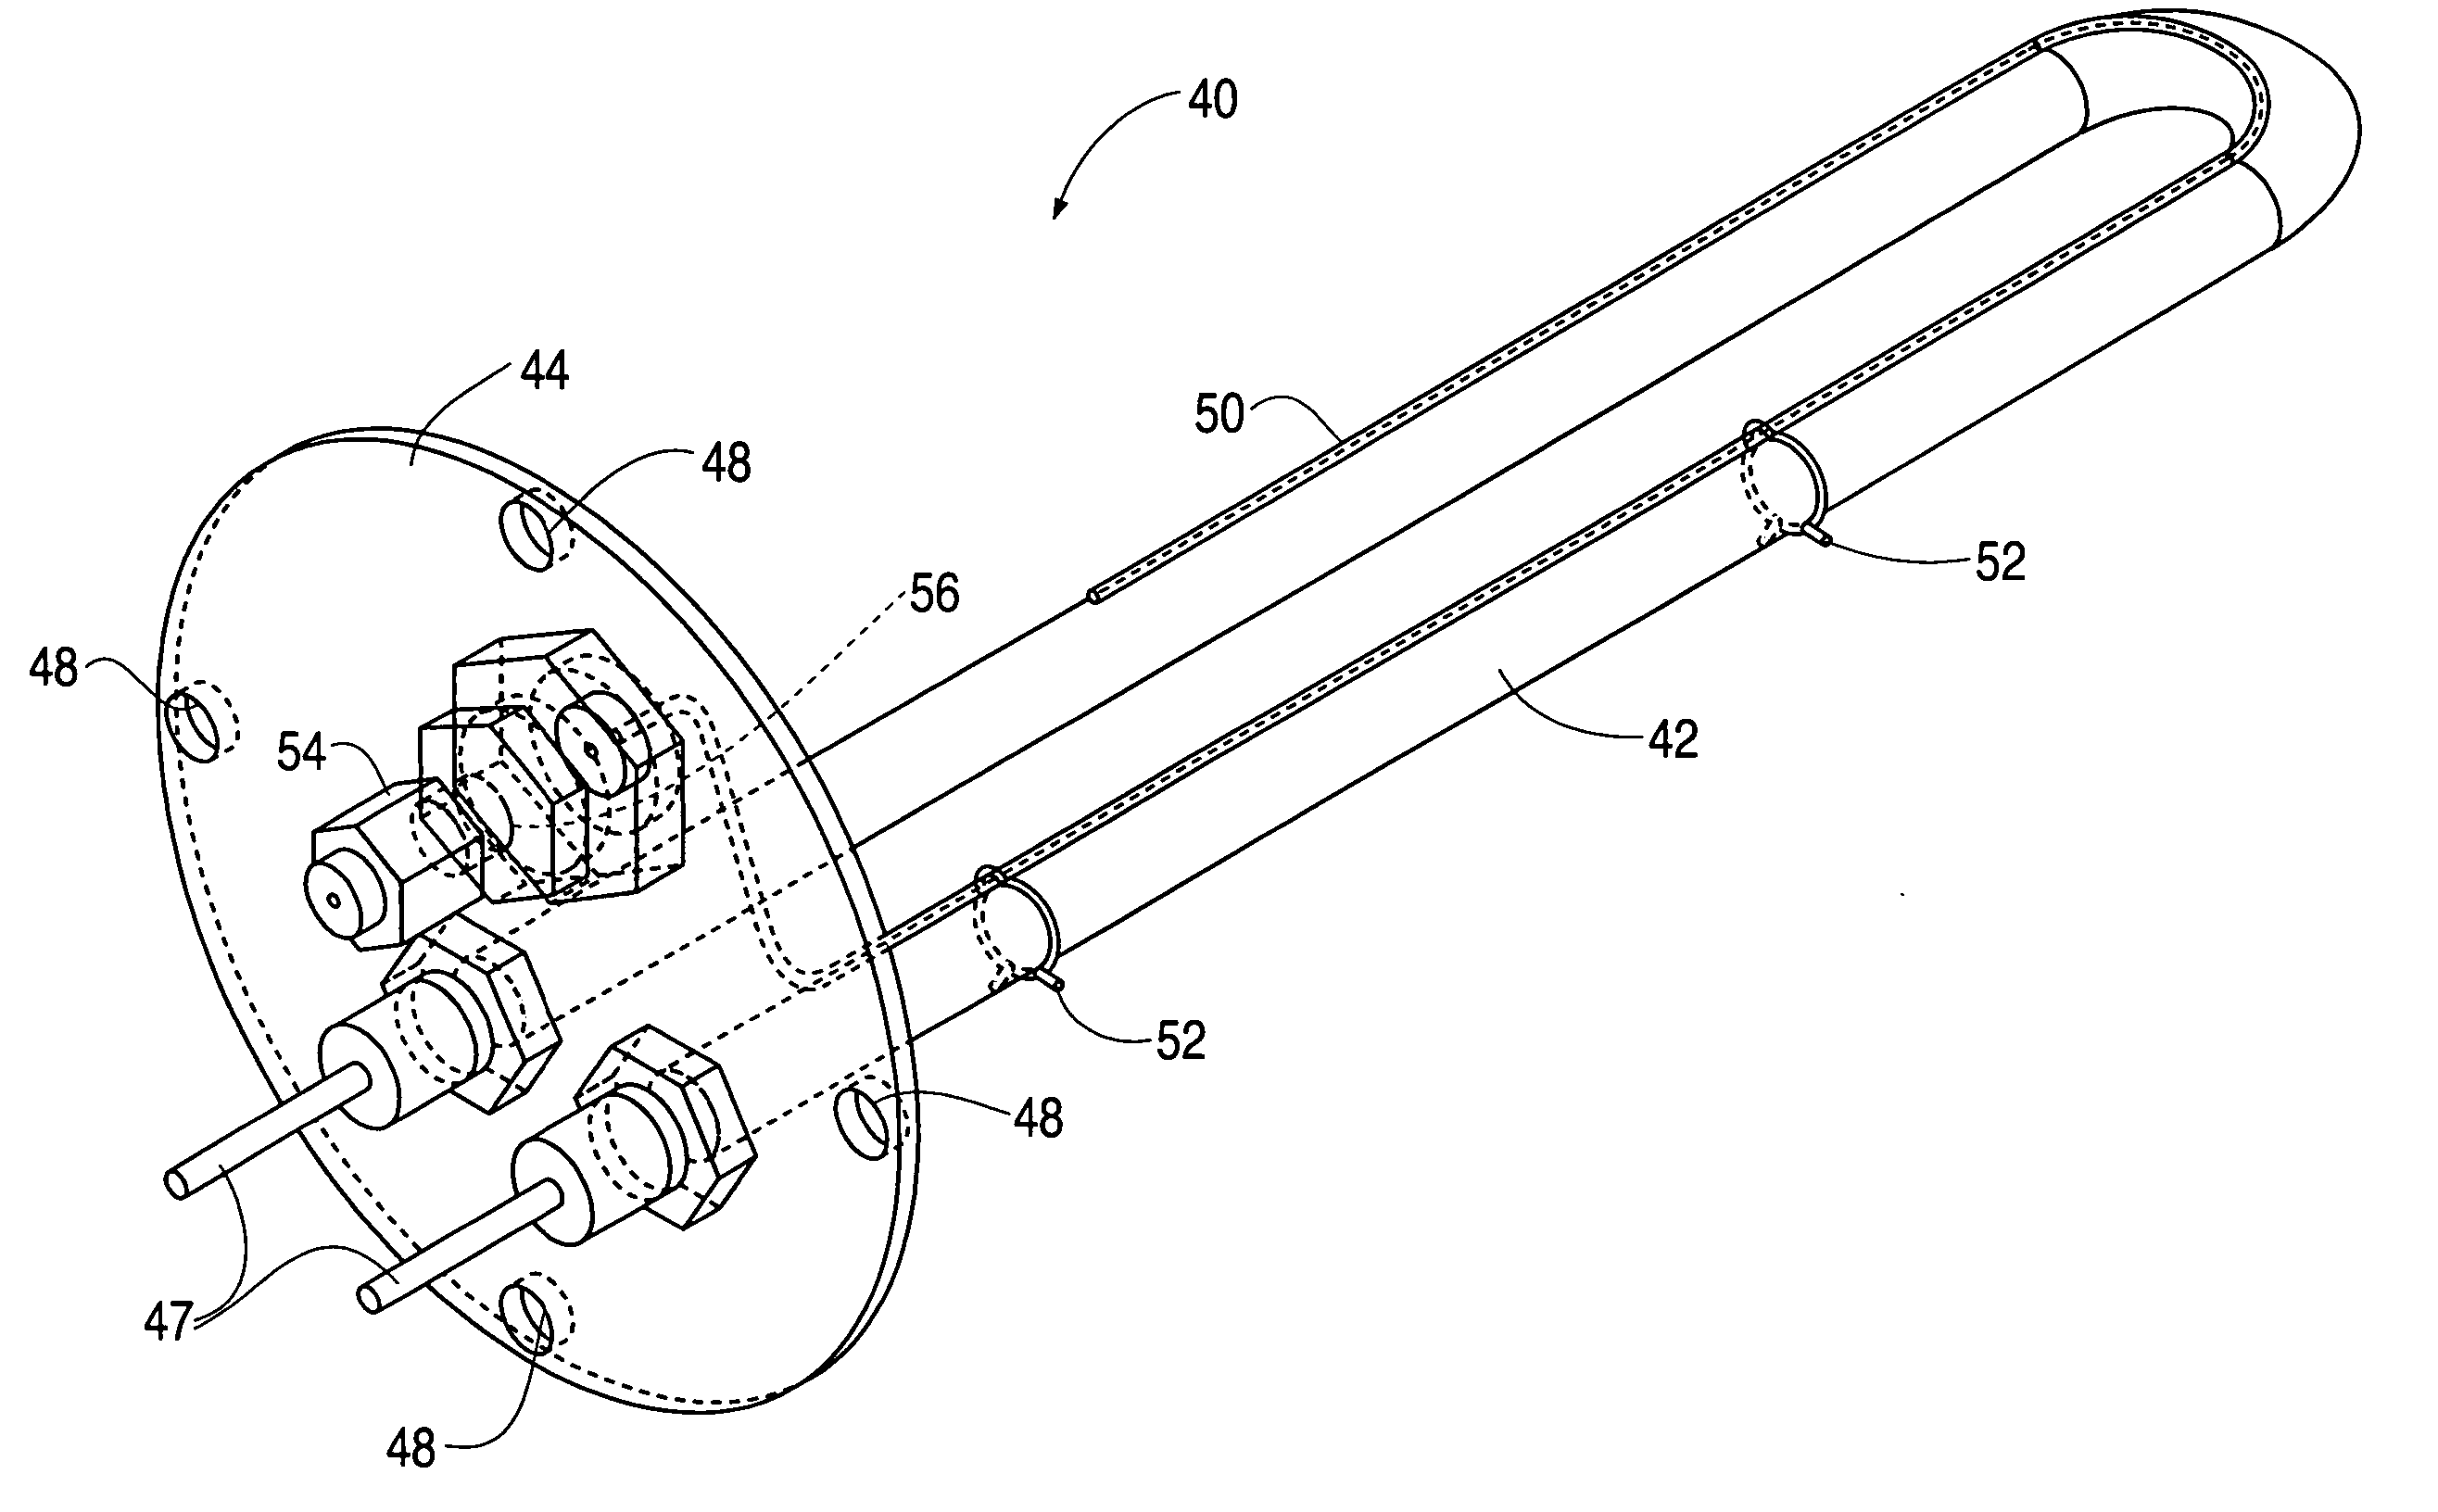 Steam generating method and apparatus for simulation test chambers